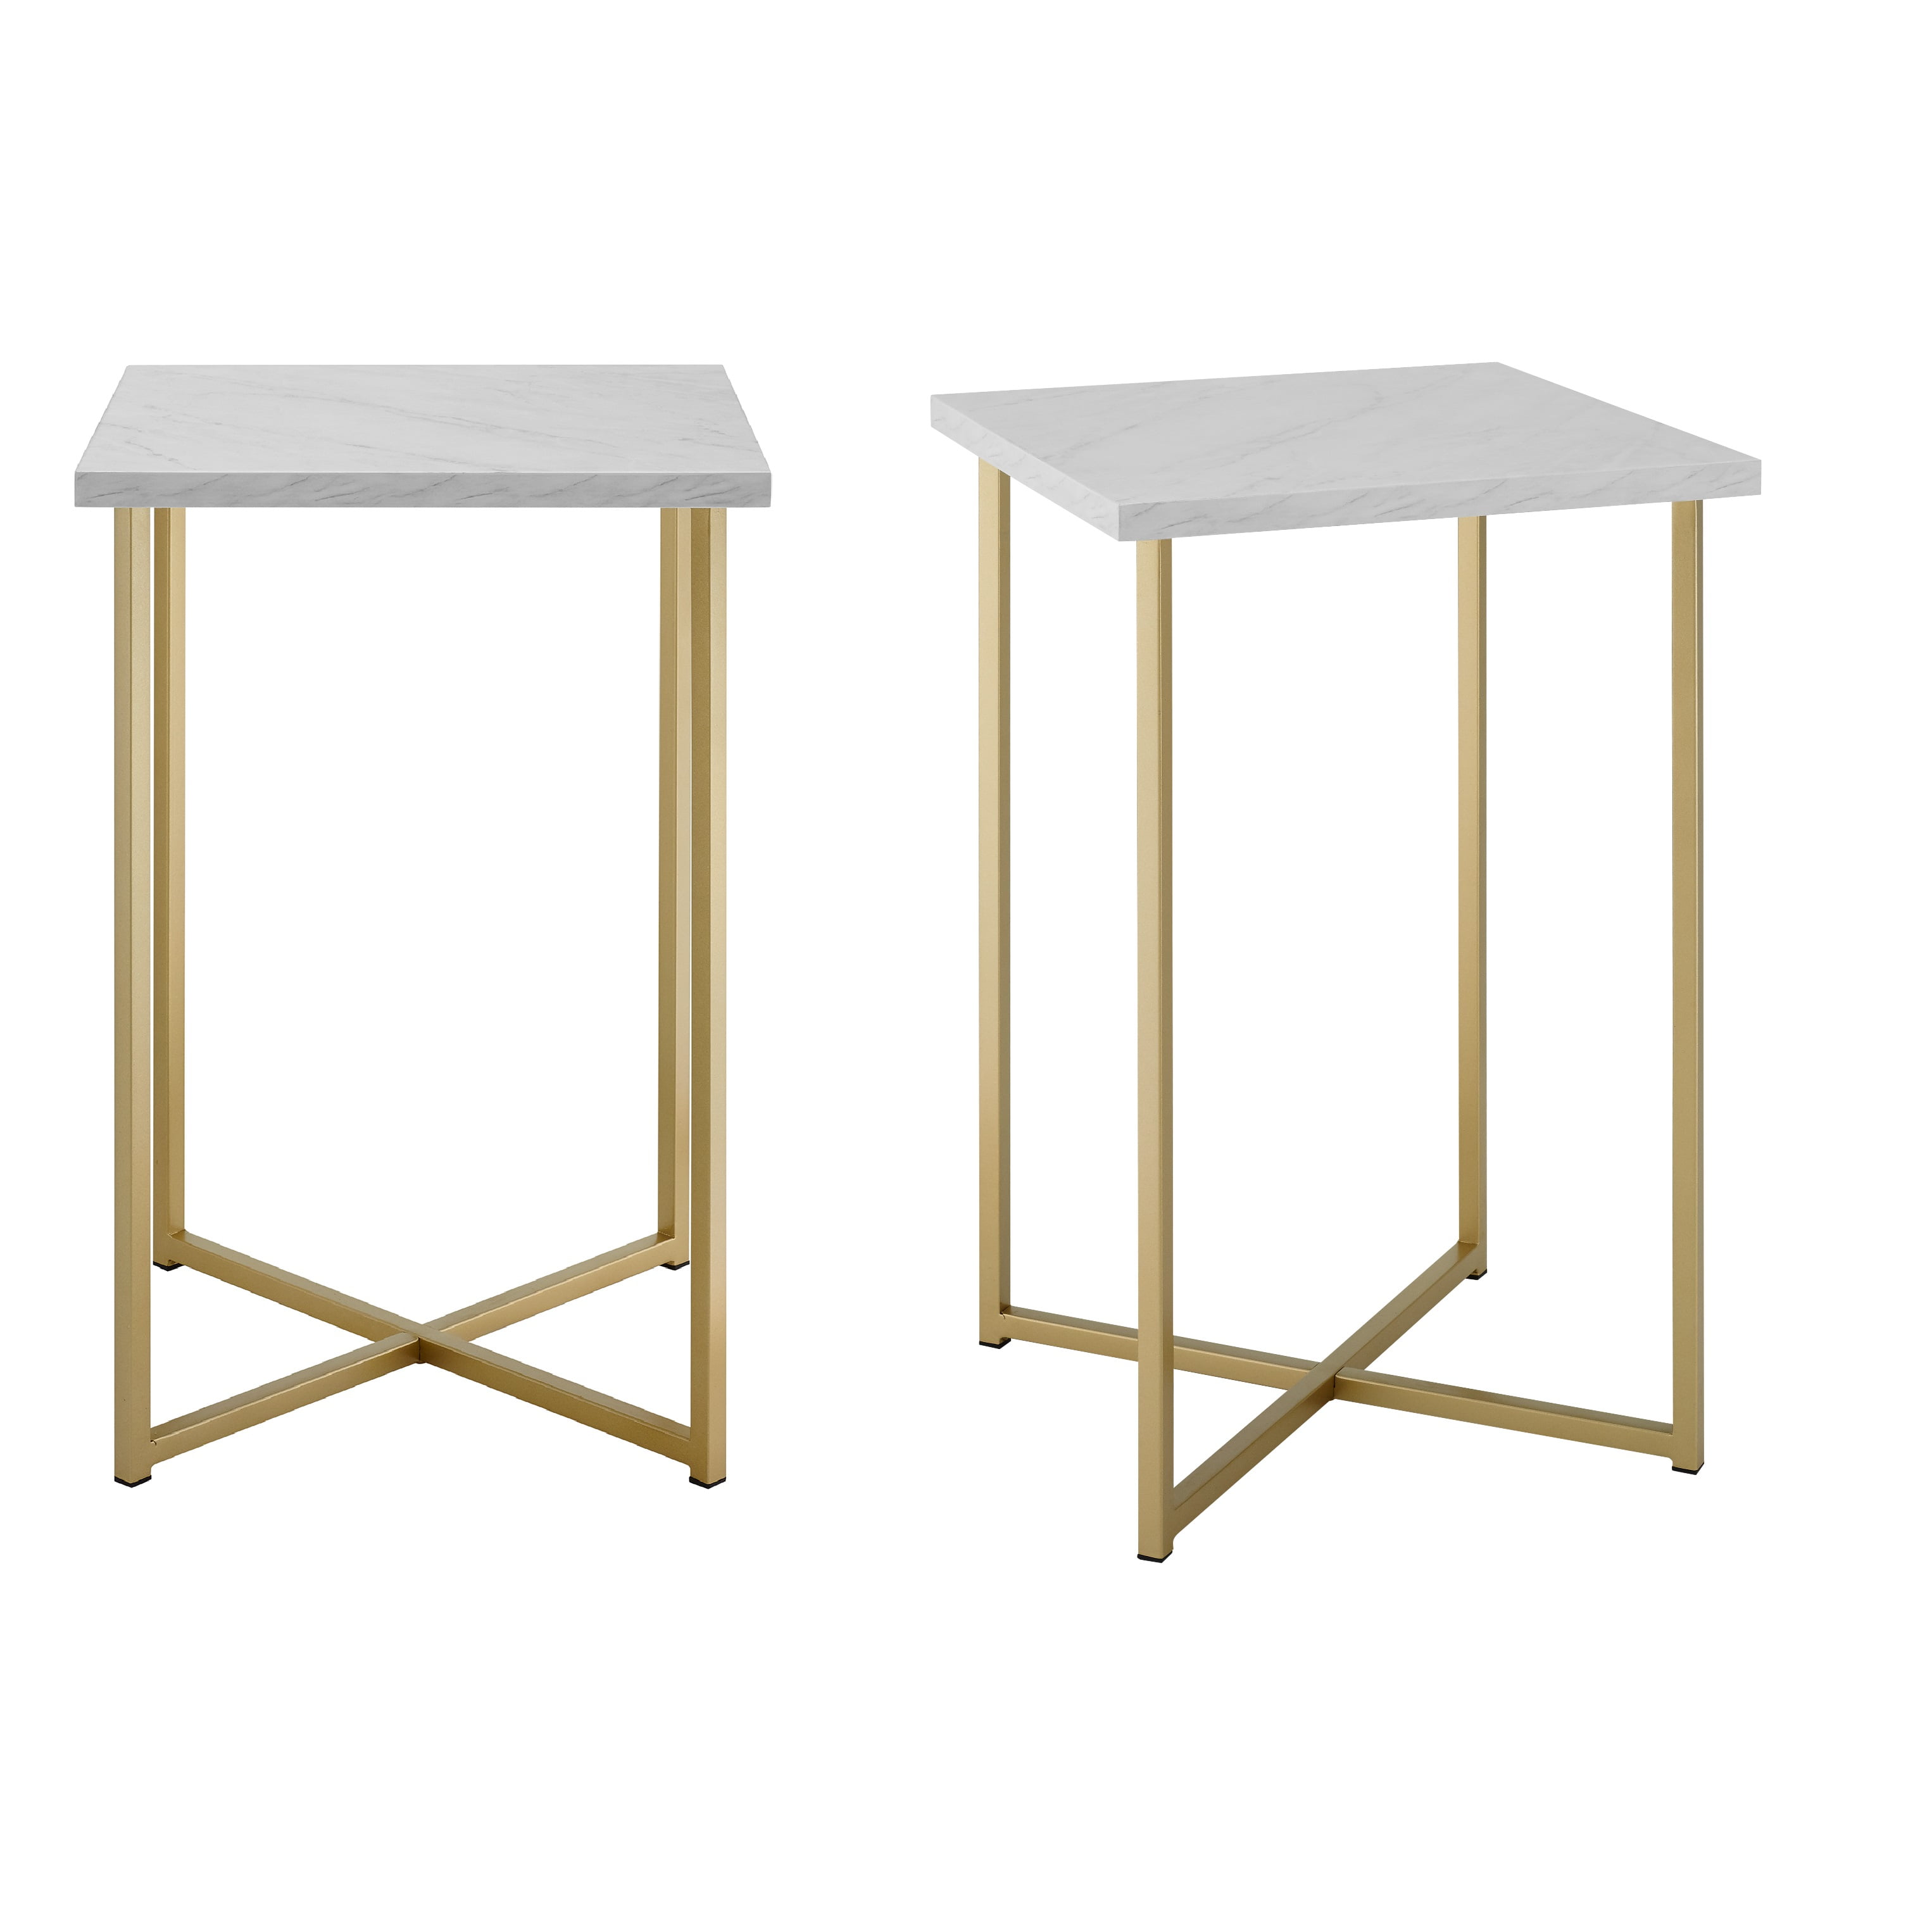 Modern Faux Marble Sofa Side Table Accent End Table Tea Table with Gold Metal Frame for Living Room Balcony Black Gold Henf Nesting Coffee Table Set of 2